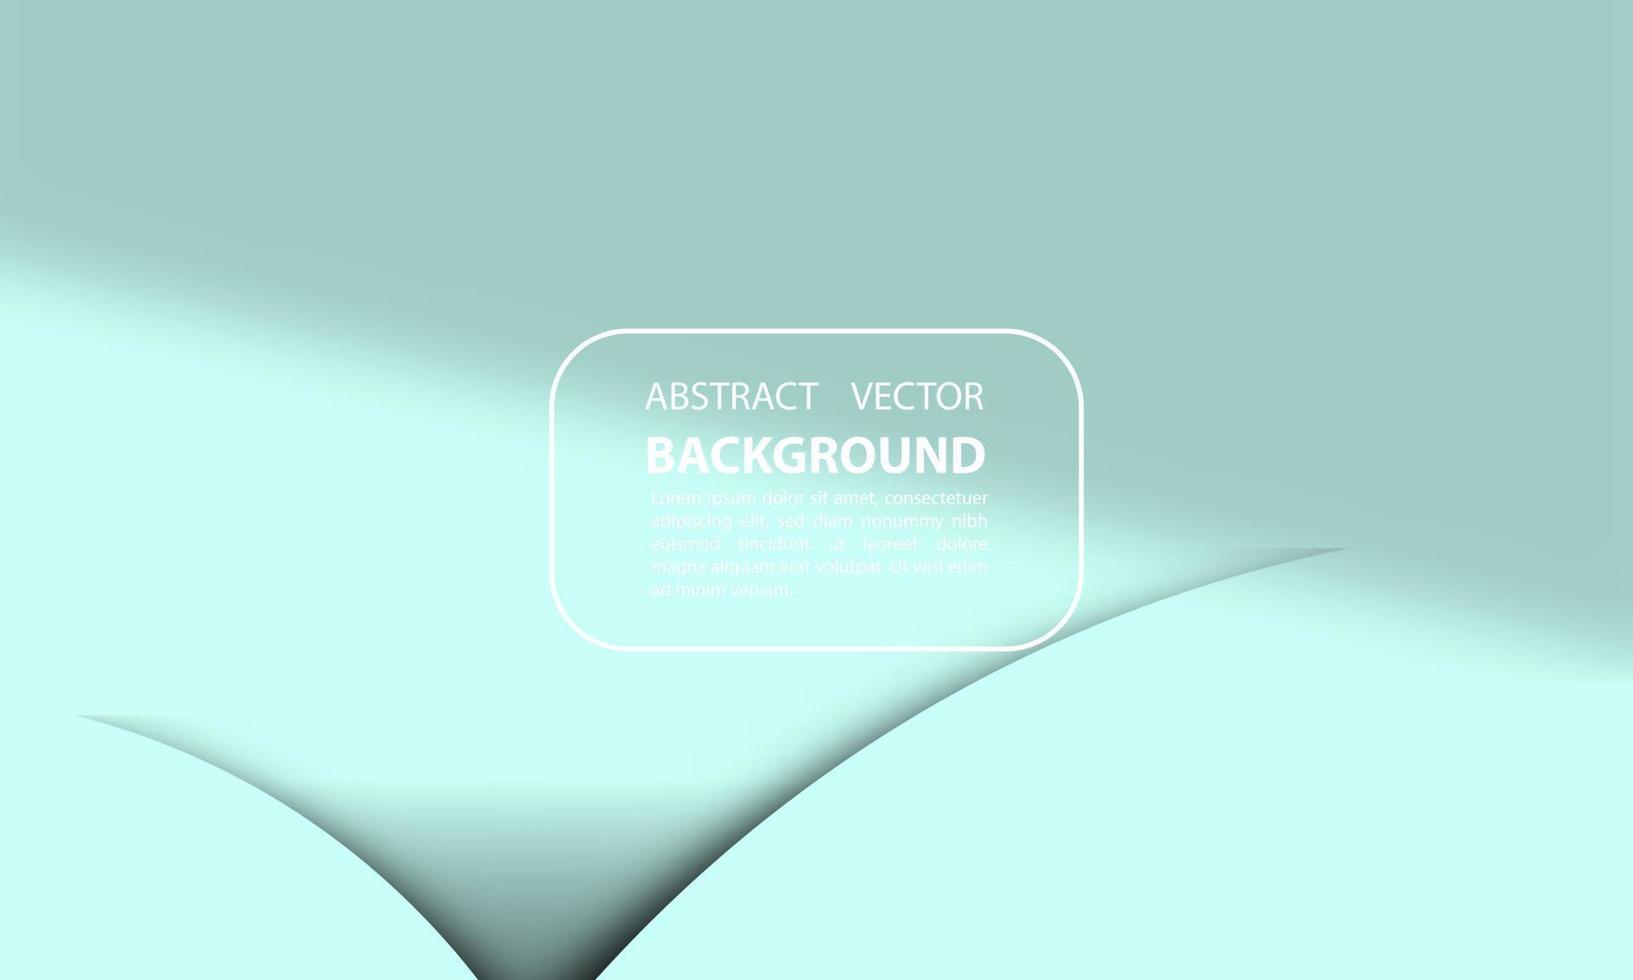 geometric background abstract color blue ocean shadow overlay illustrasi trendy mock up for posters, banners, and others, vector design eps 10